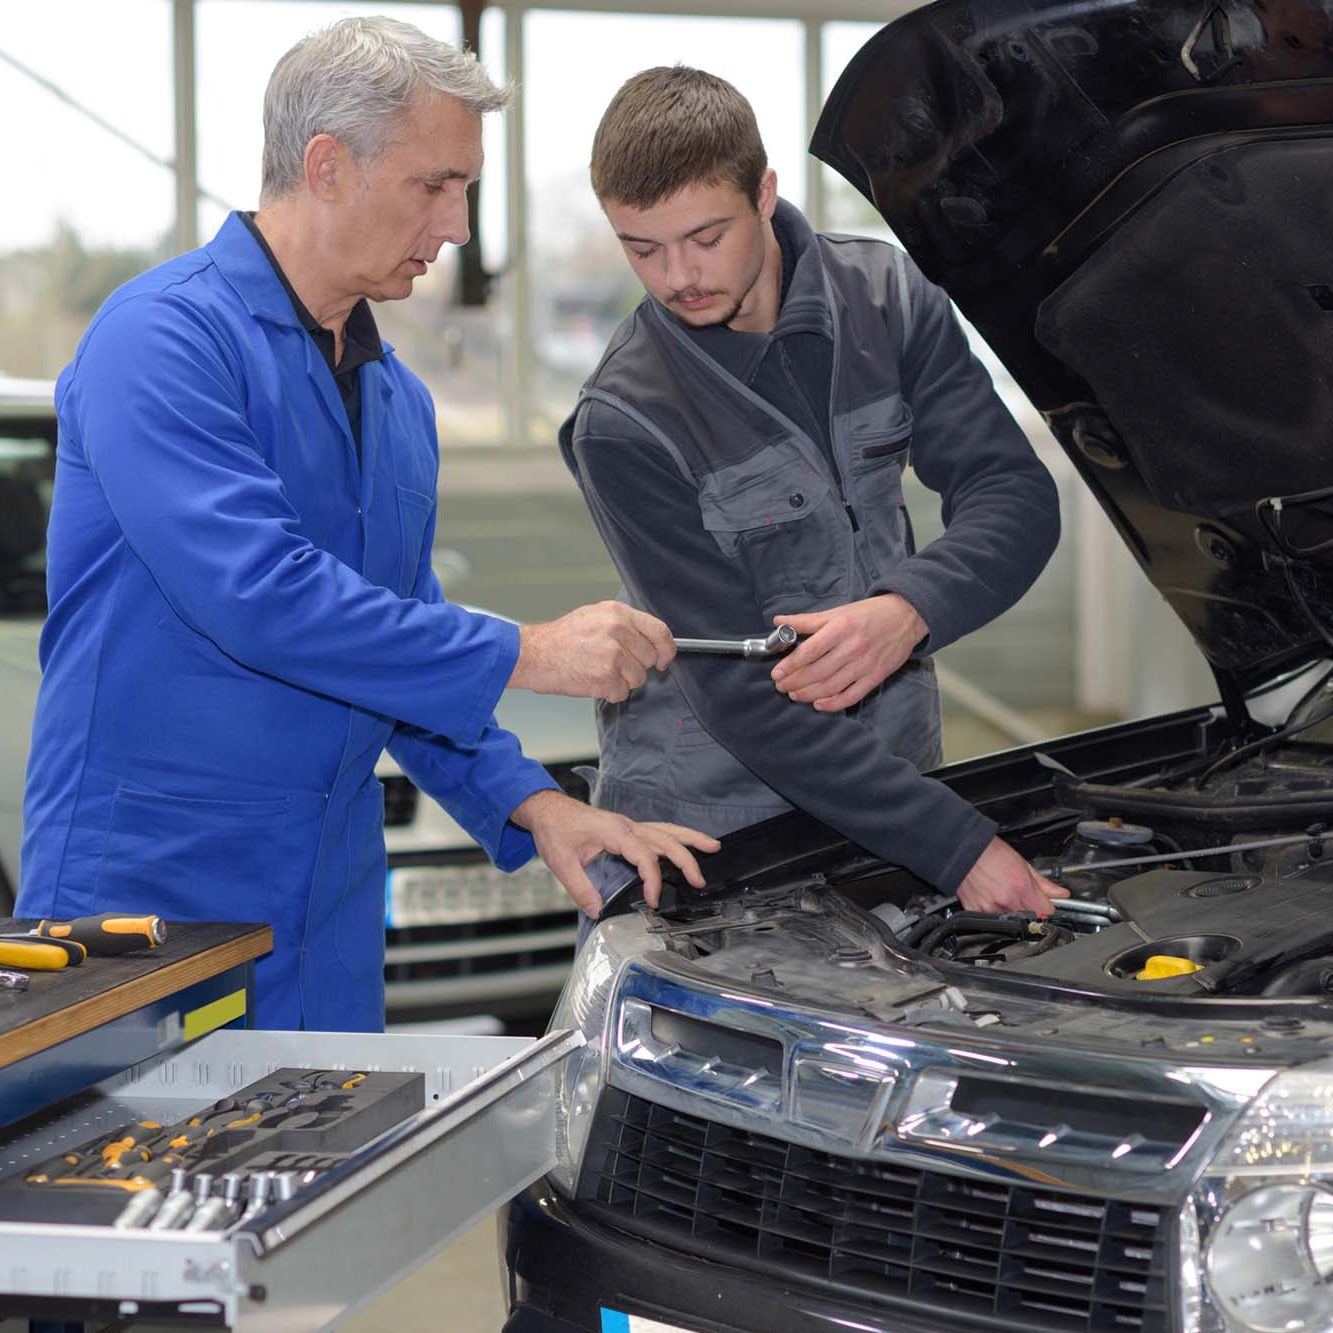 Student mechanic learning from teacher in automotive vocational school trainee